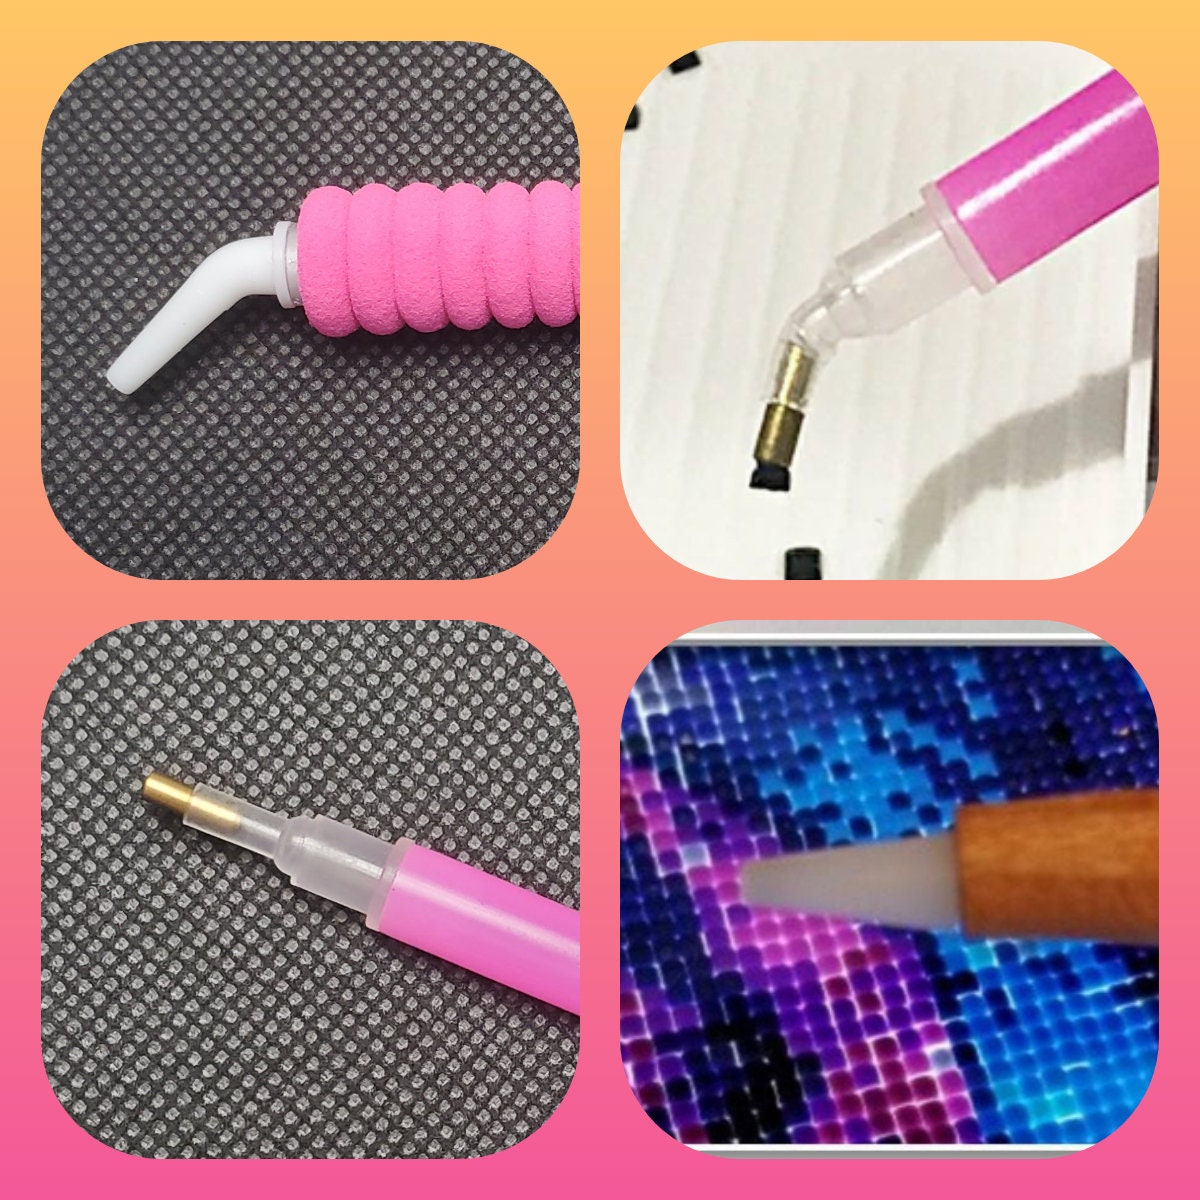 DIY Diamond Art Pen Resin Diamond Painting Pens.each Pen Includes 4 Tips  and 1 Correction Plate.diamond Painting Accessories. 